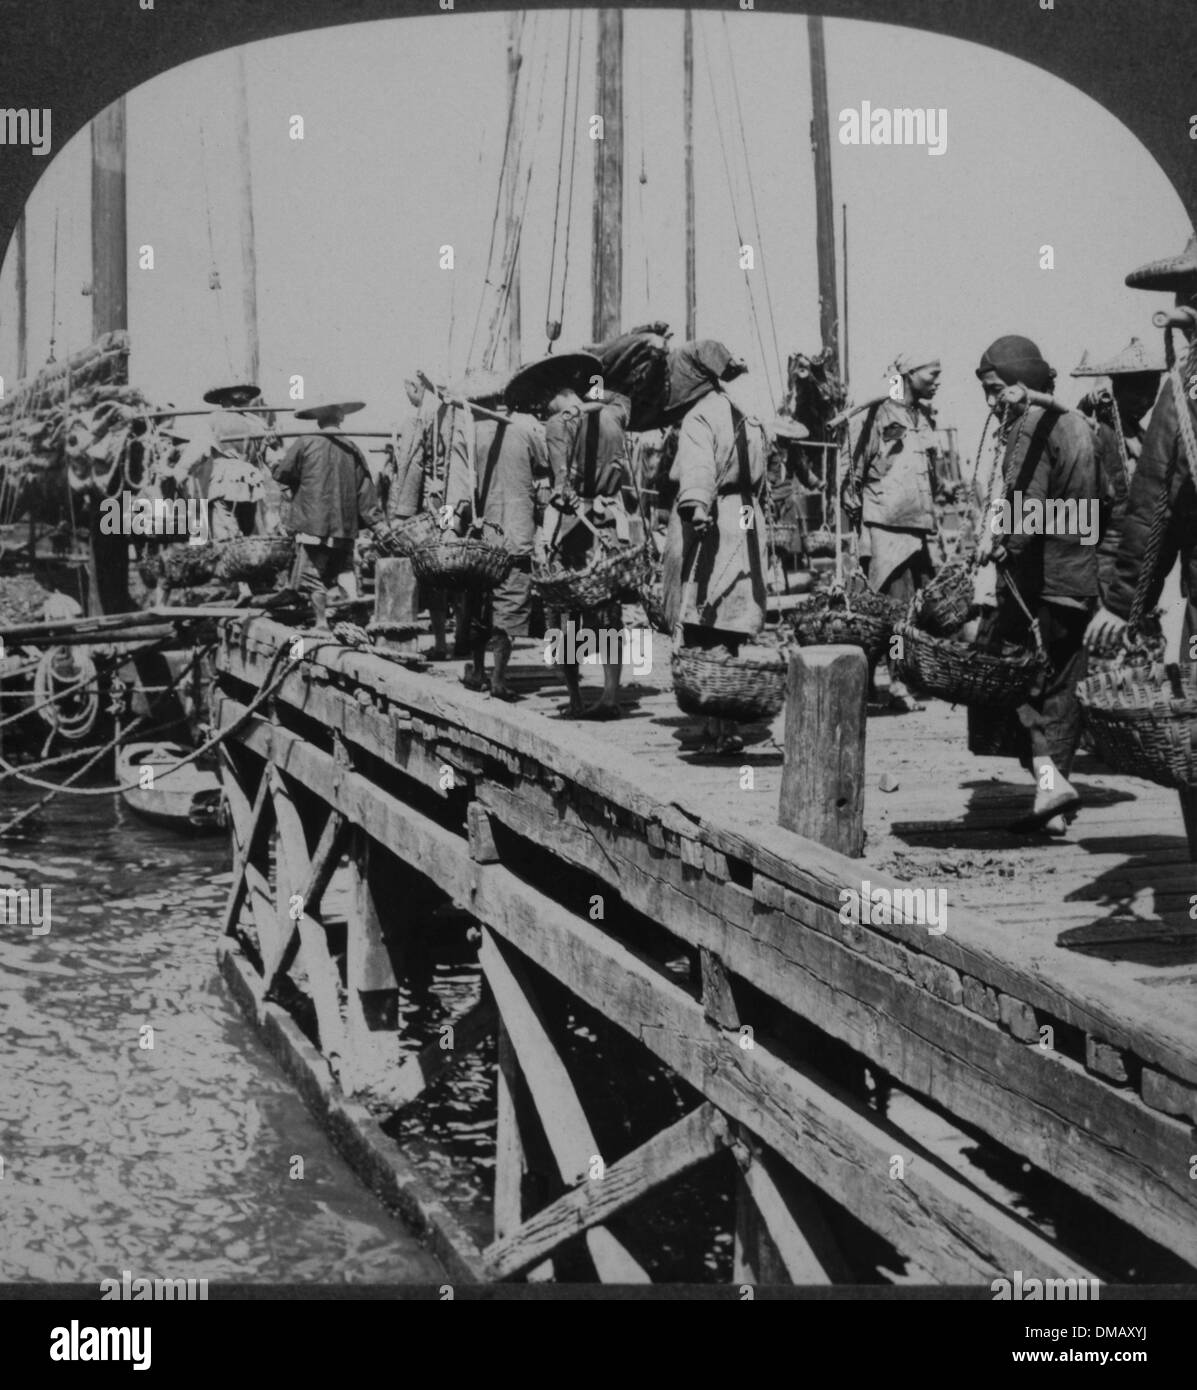 Coolies Carrying Filled Baskets on Docks, Hong Kong, 1910 Stock Photo